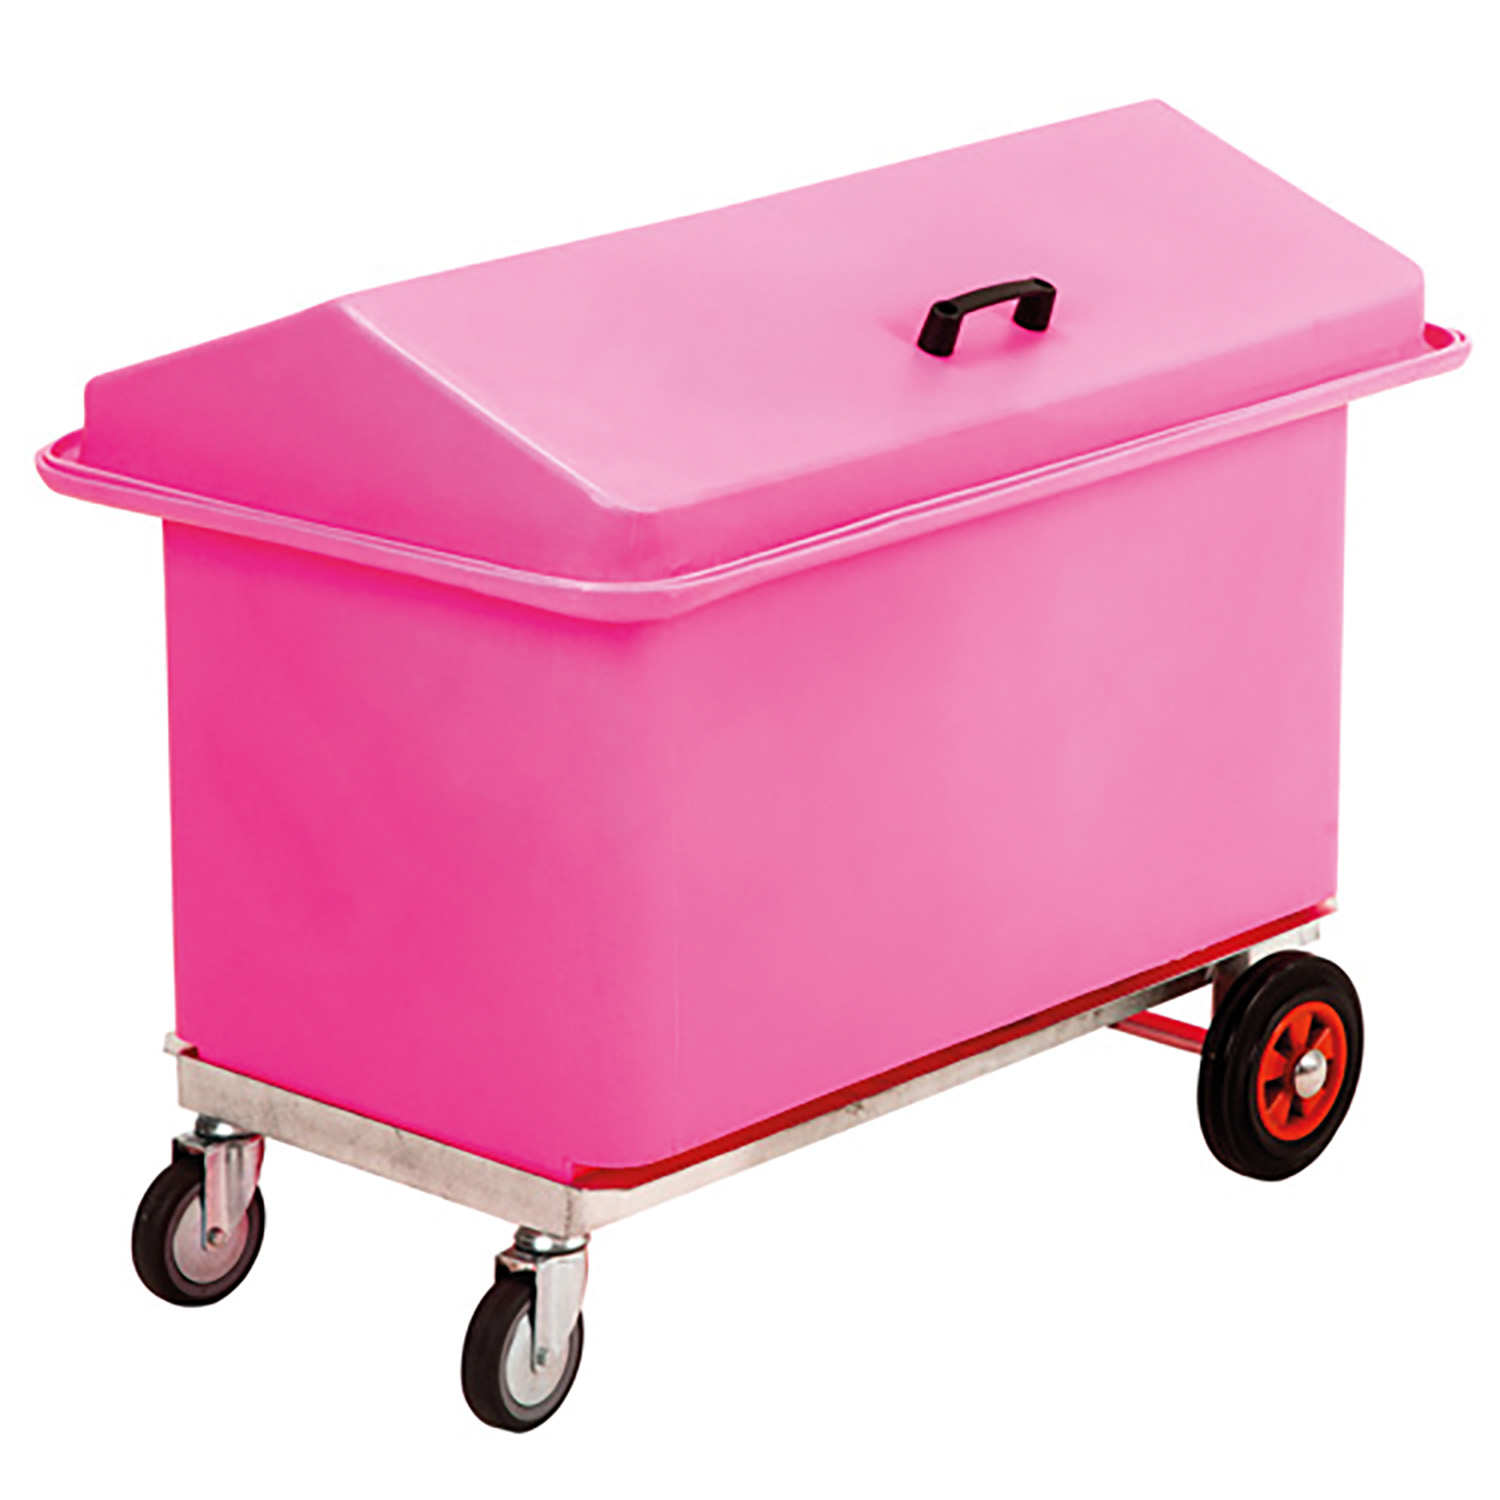 STUBBS MOBILE CHEST ONE COMPARTMENT S58315 PINK ONE COMPARTMENT MOBILE